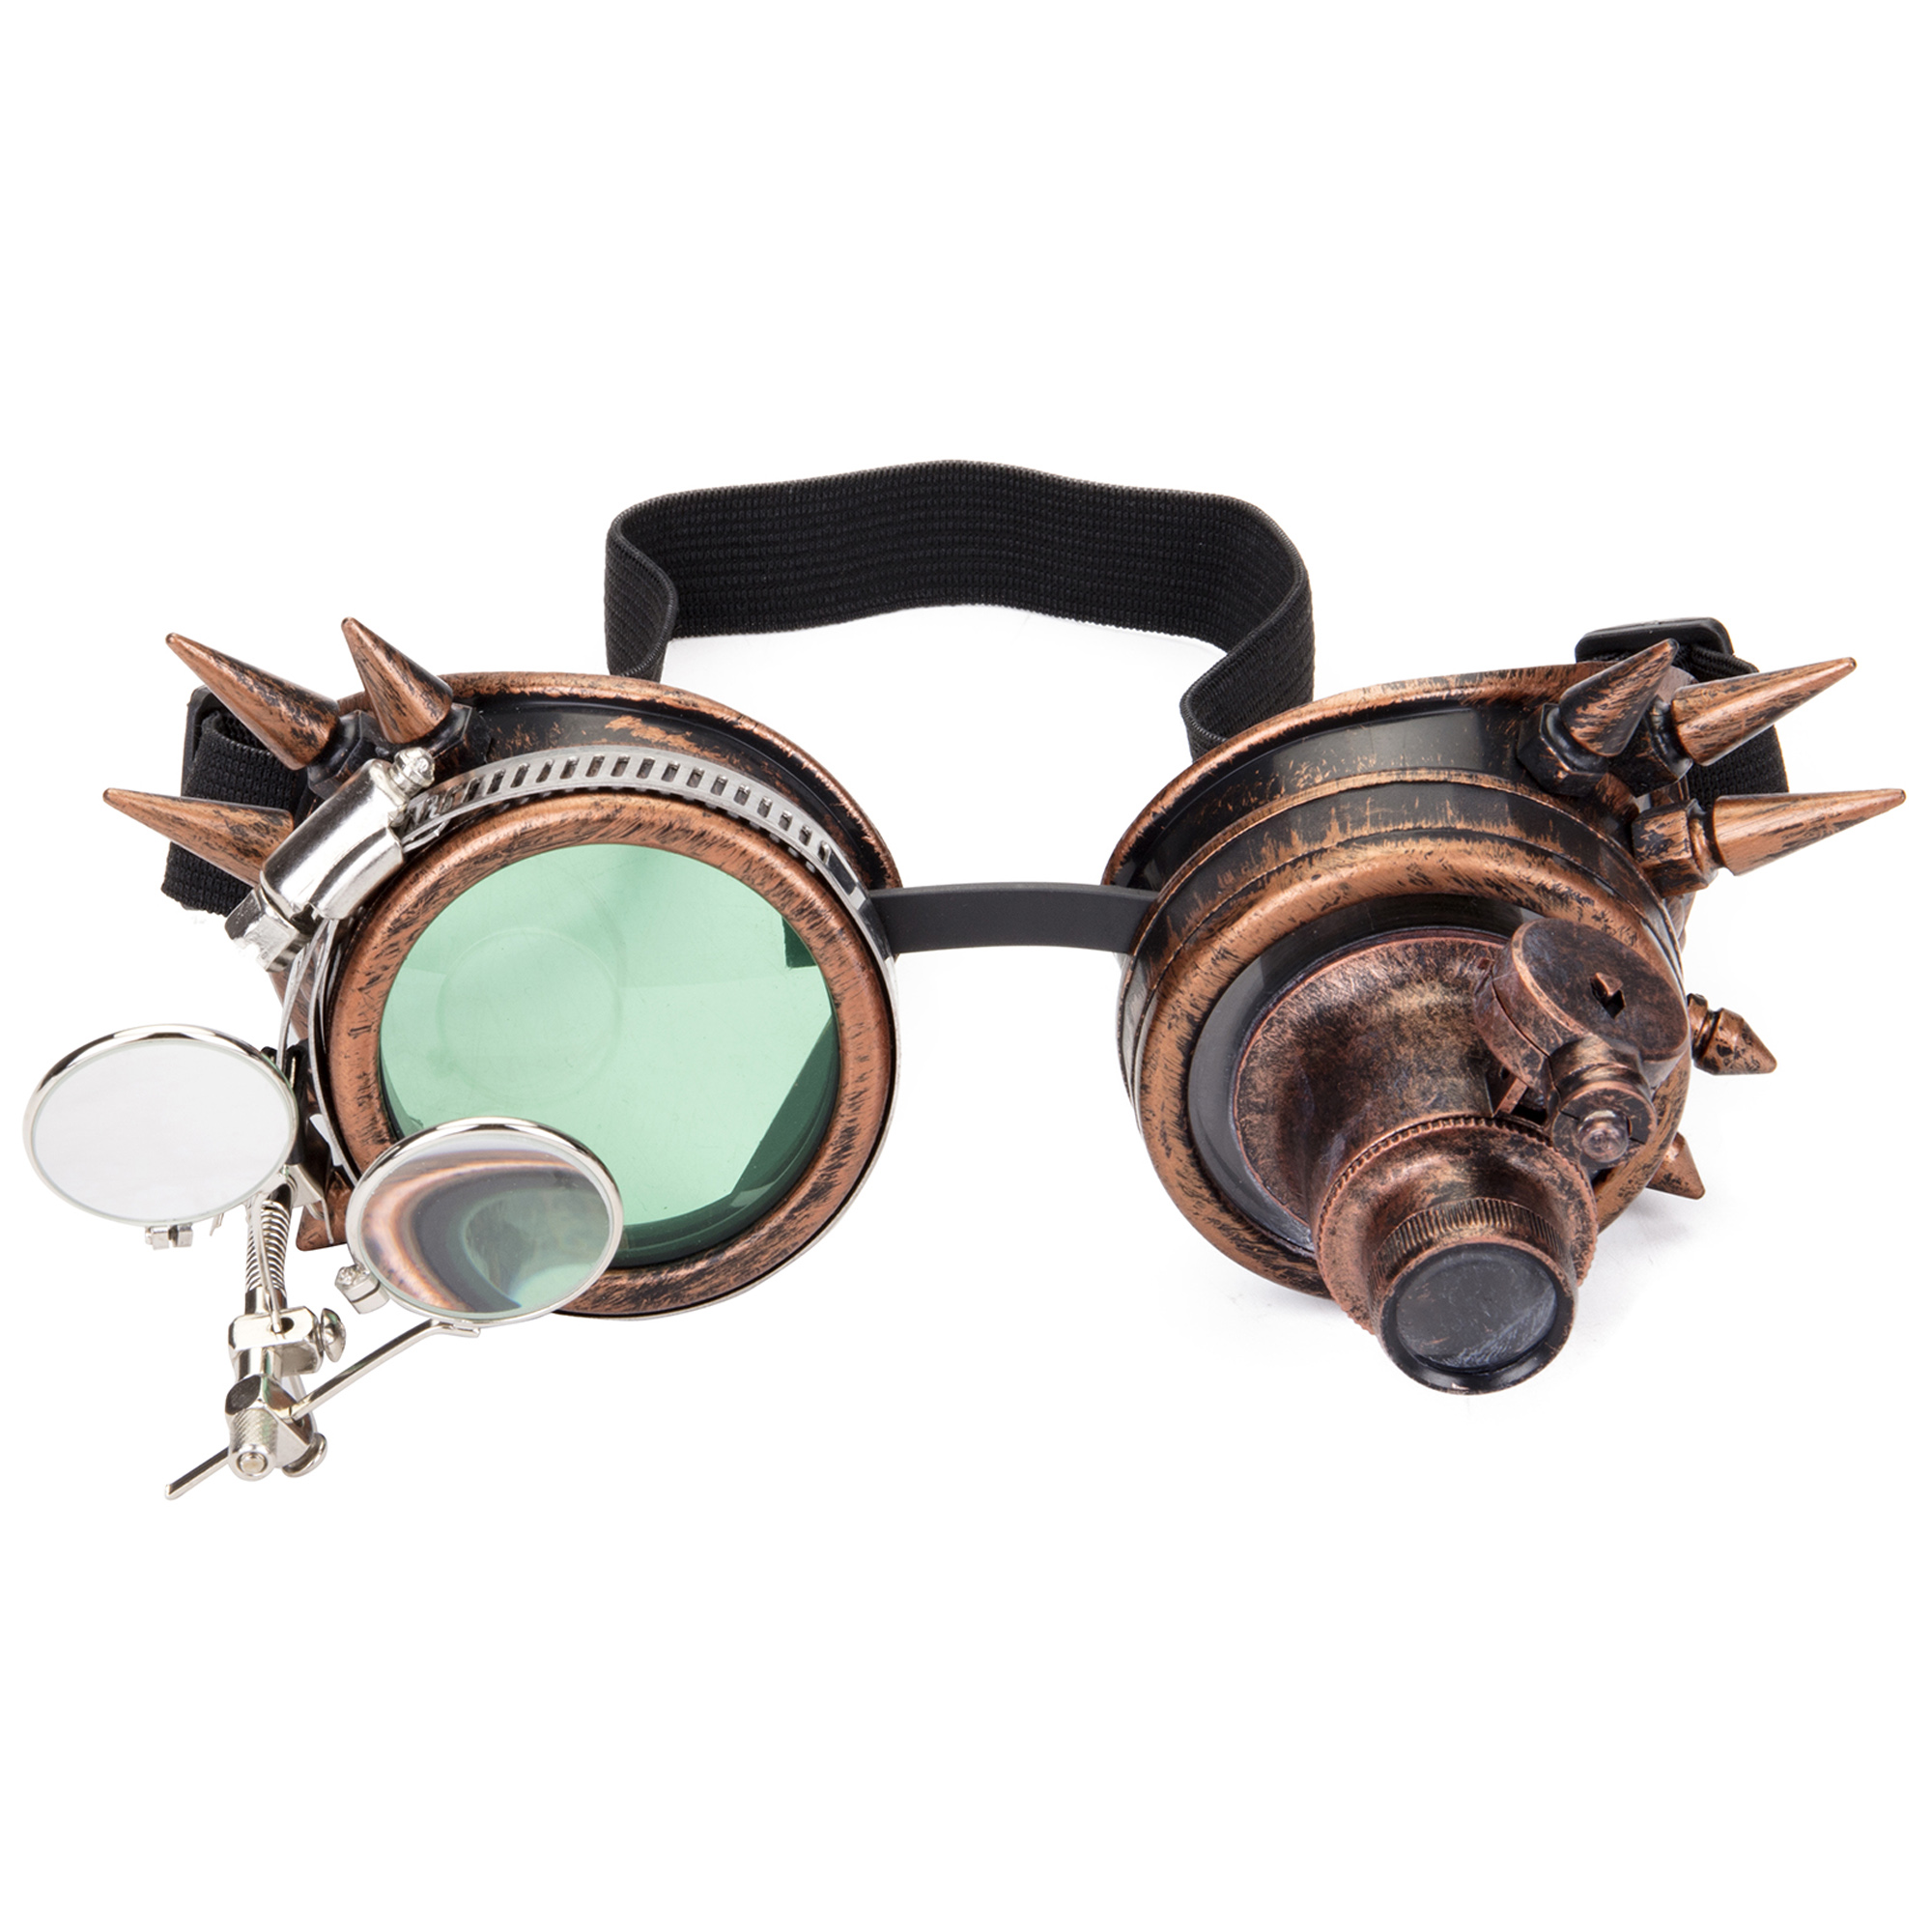 Sayfut Vintage Red Copper Steampunk Goggles with Double Ocular Loupe Retro Rivet PuSAYFUT Gothic Cosplay Goggles Glasses Eyewear, Adult Unisex, Size